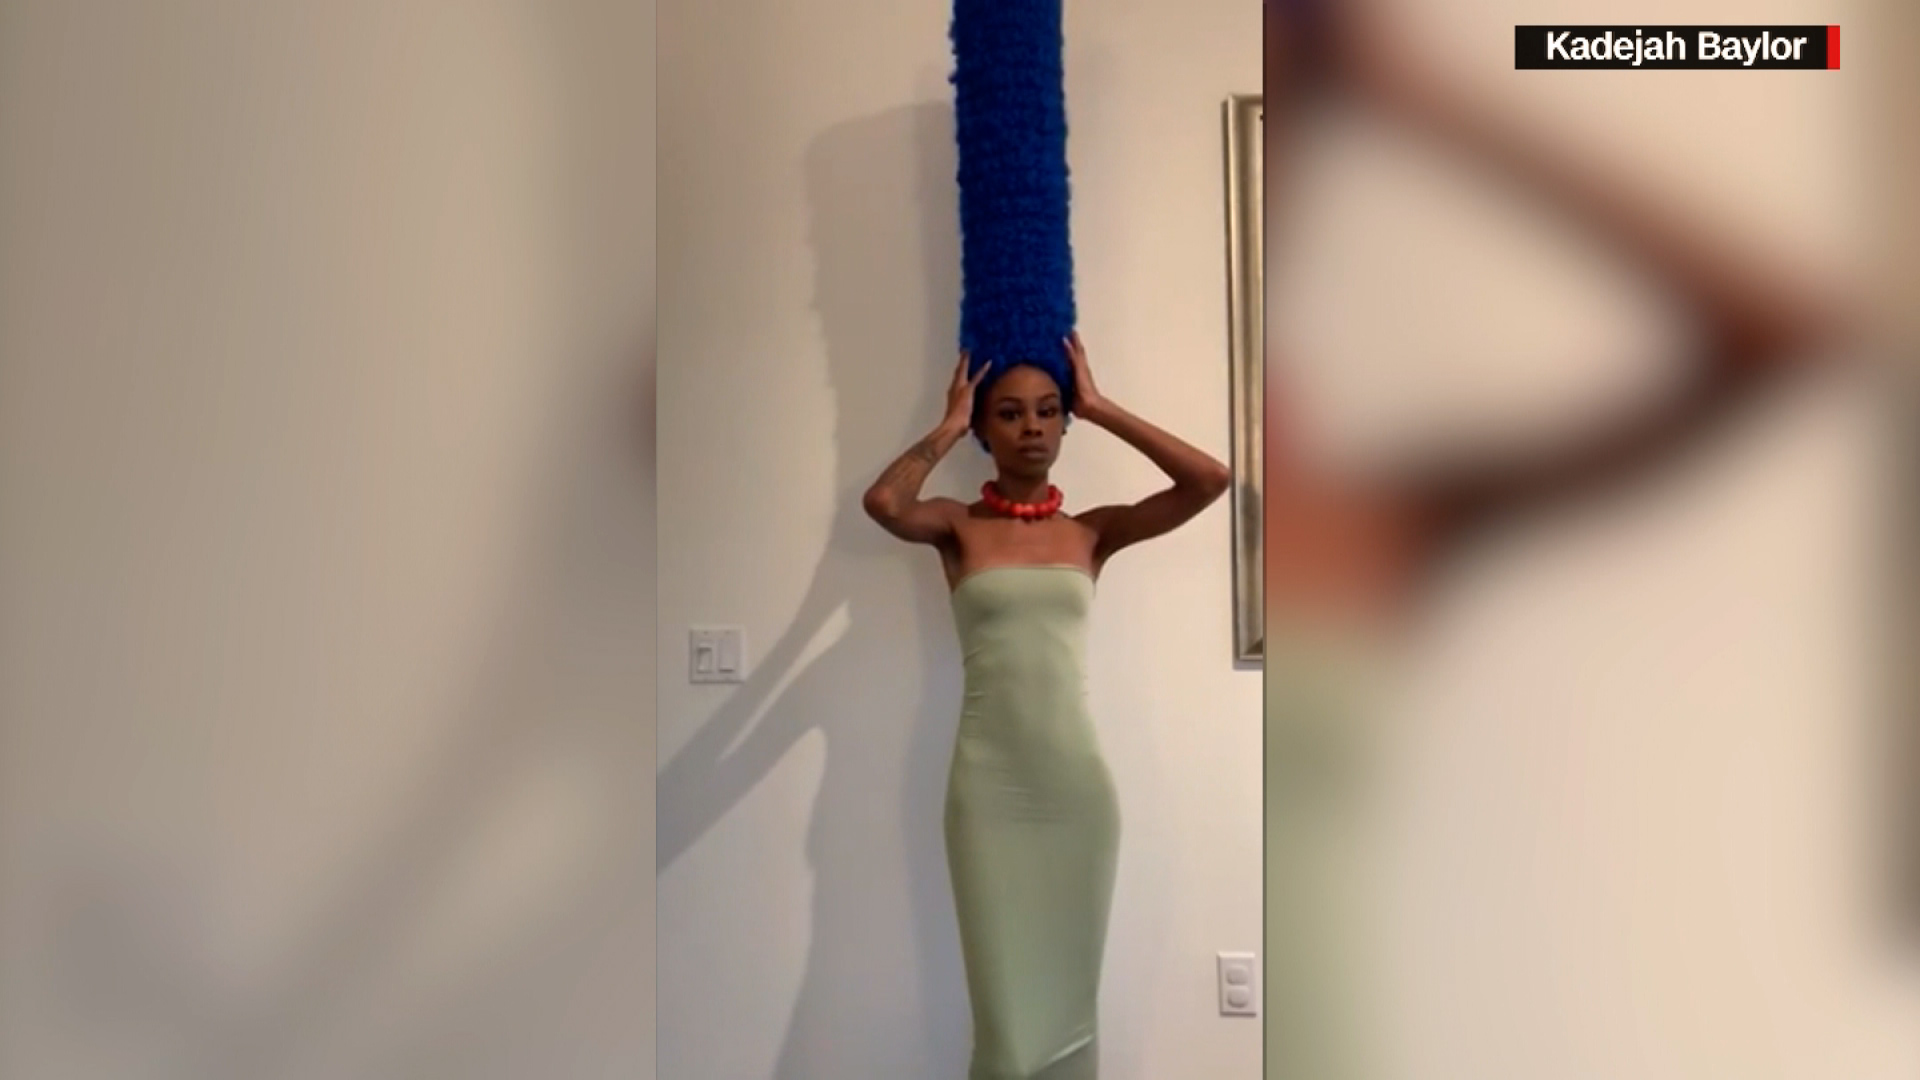 ventilation Well educated trumpet Marge Simpson lookalike: Social media wigs out over this 'Simpsons' costume  - CNN Video